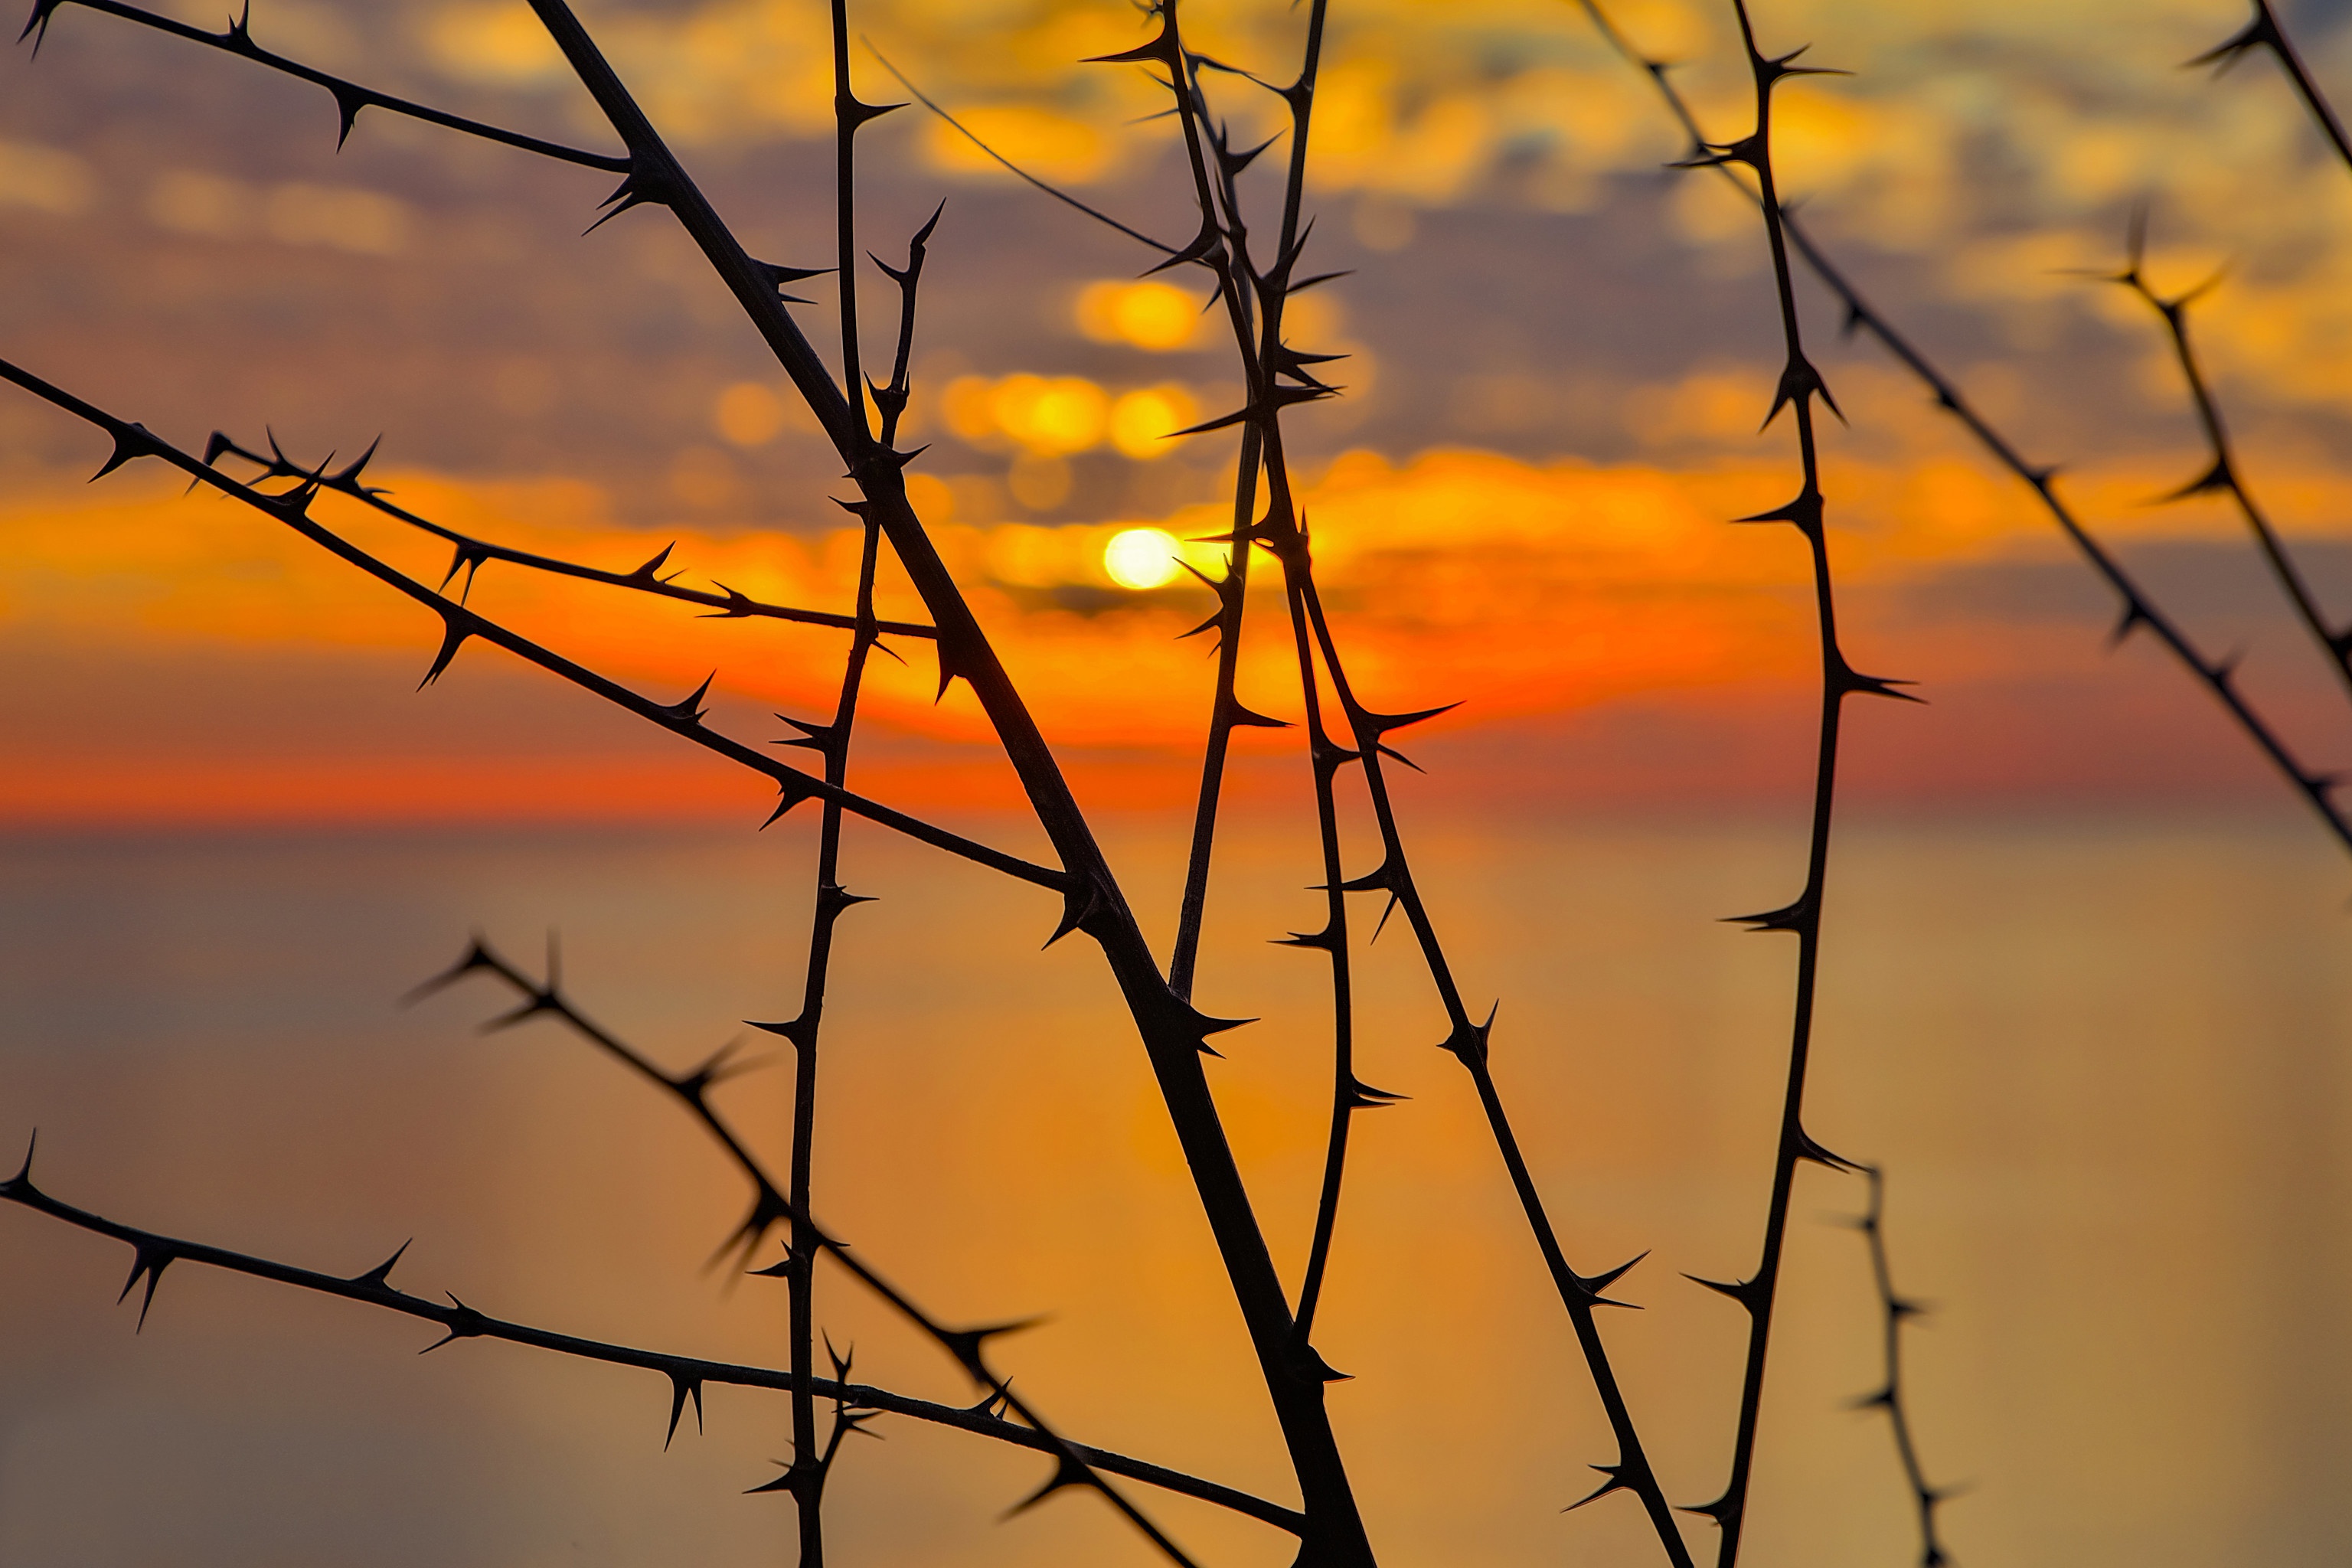 earth, sunset, branch, silhouette, spikes